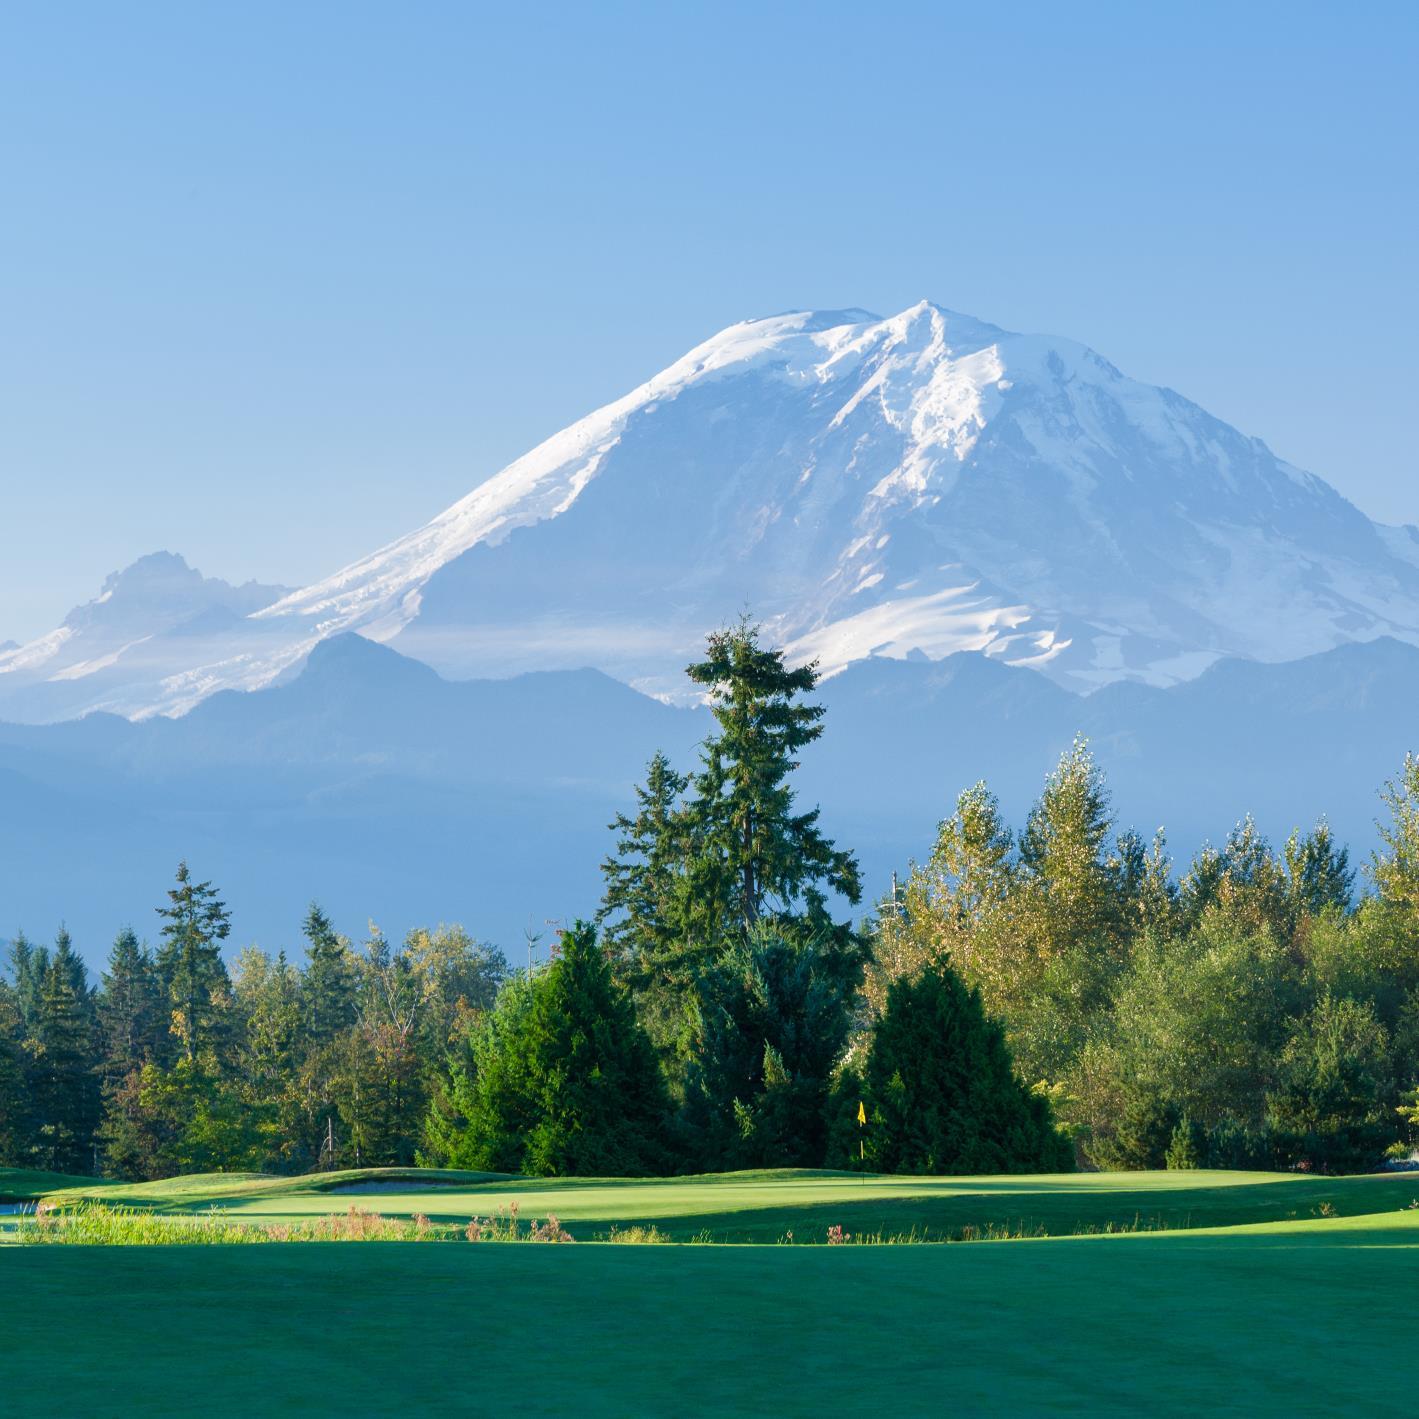 Druids Glen Golf Club offers championship golf and scenic views. Draped in the shadow of Mt. Rainier, upscale public golf course